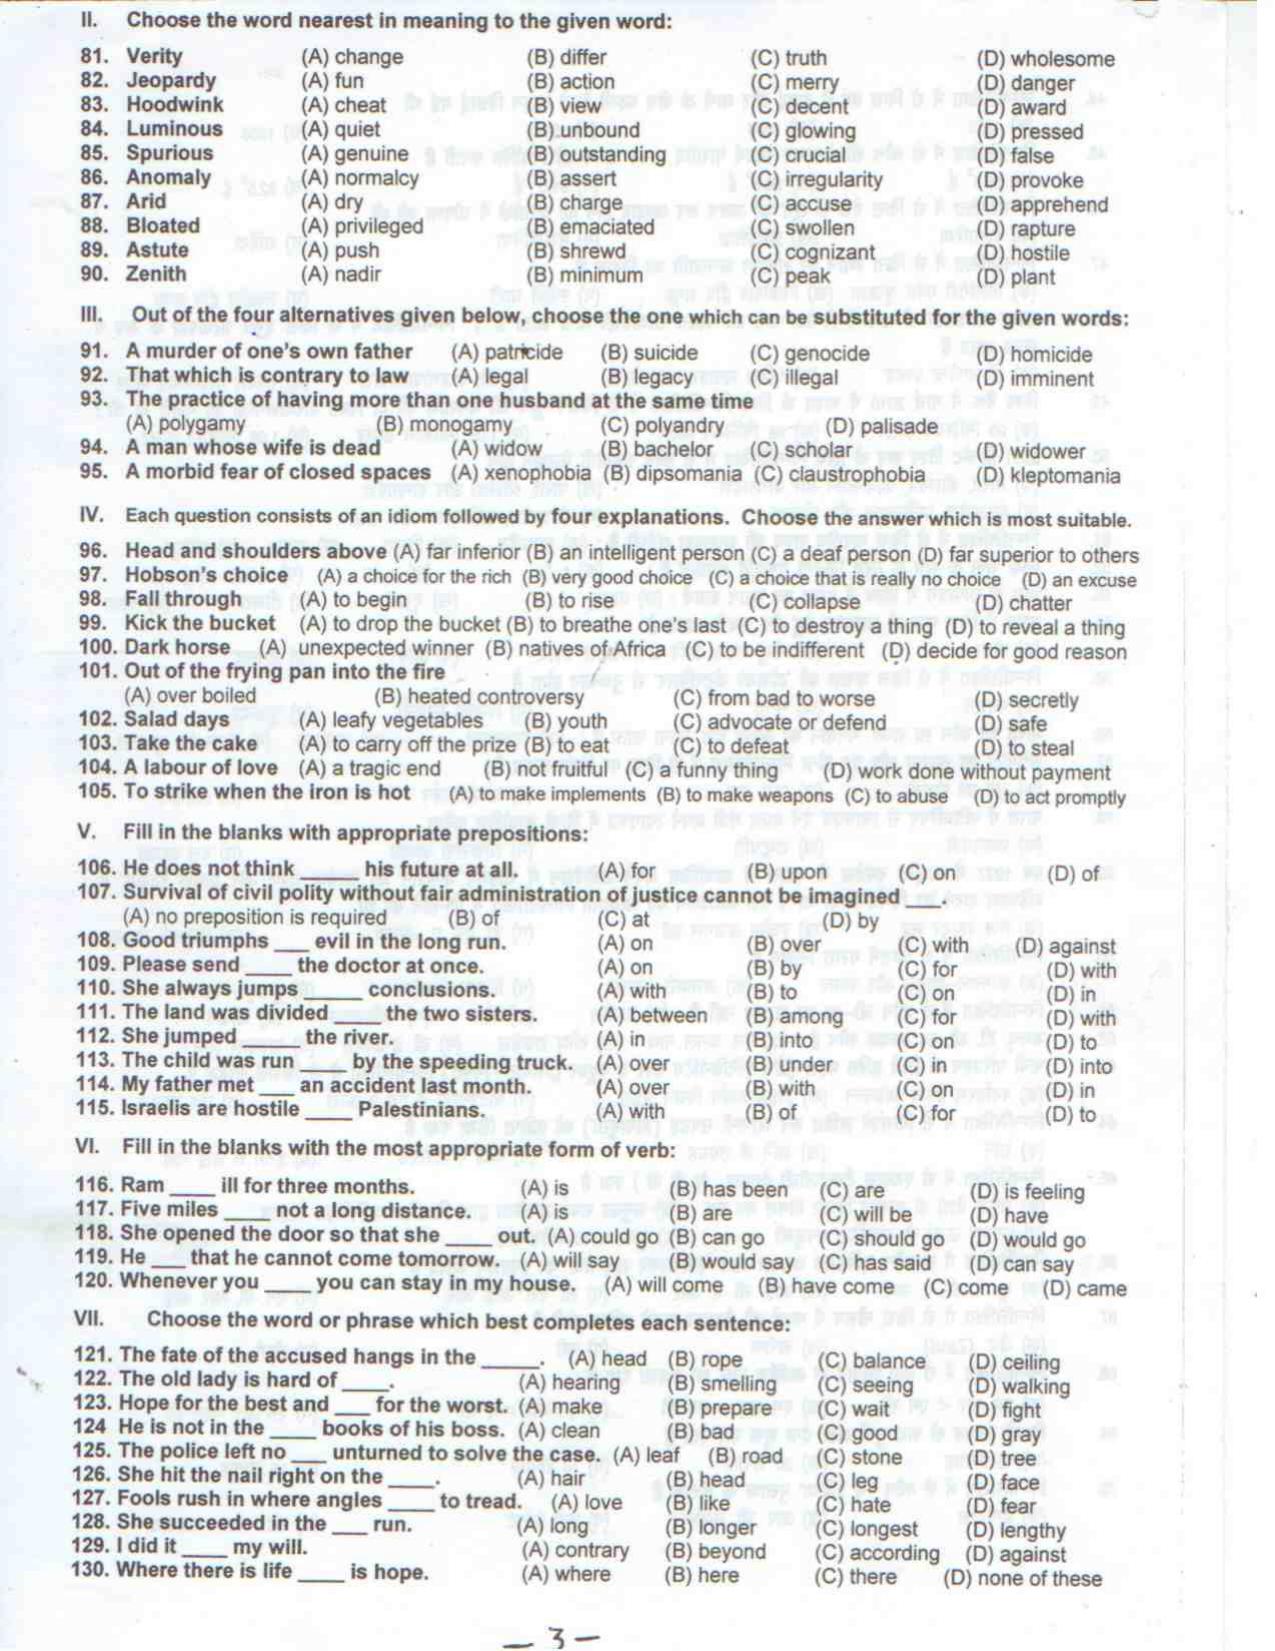 TS EAMCET 2010 Lok-Rajya Sabha: Security Assistant Grade-II Question Paper with Key (1 August 2010 Held on) - Page 3